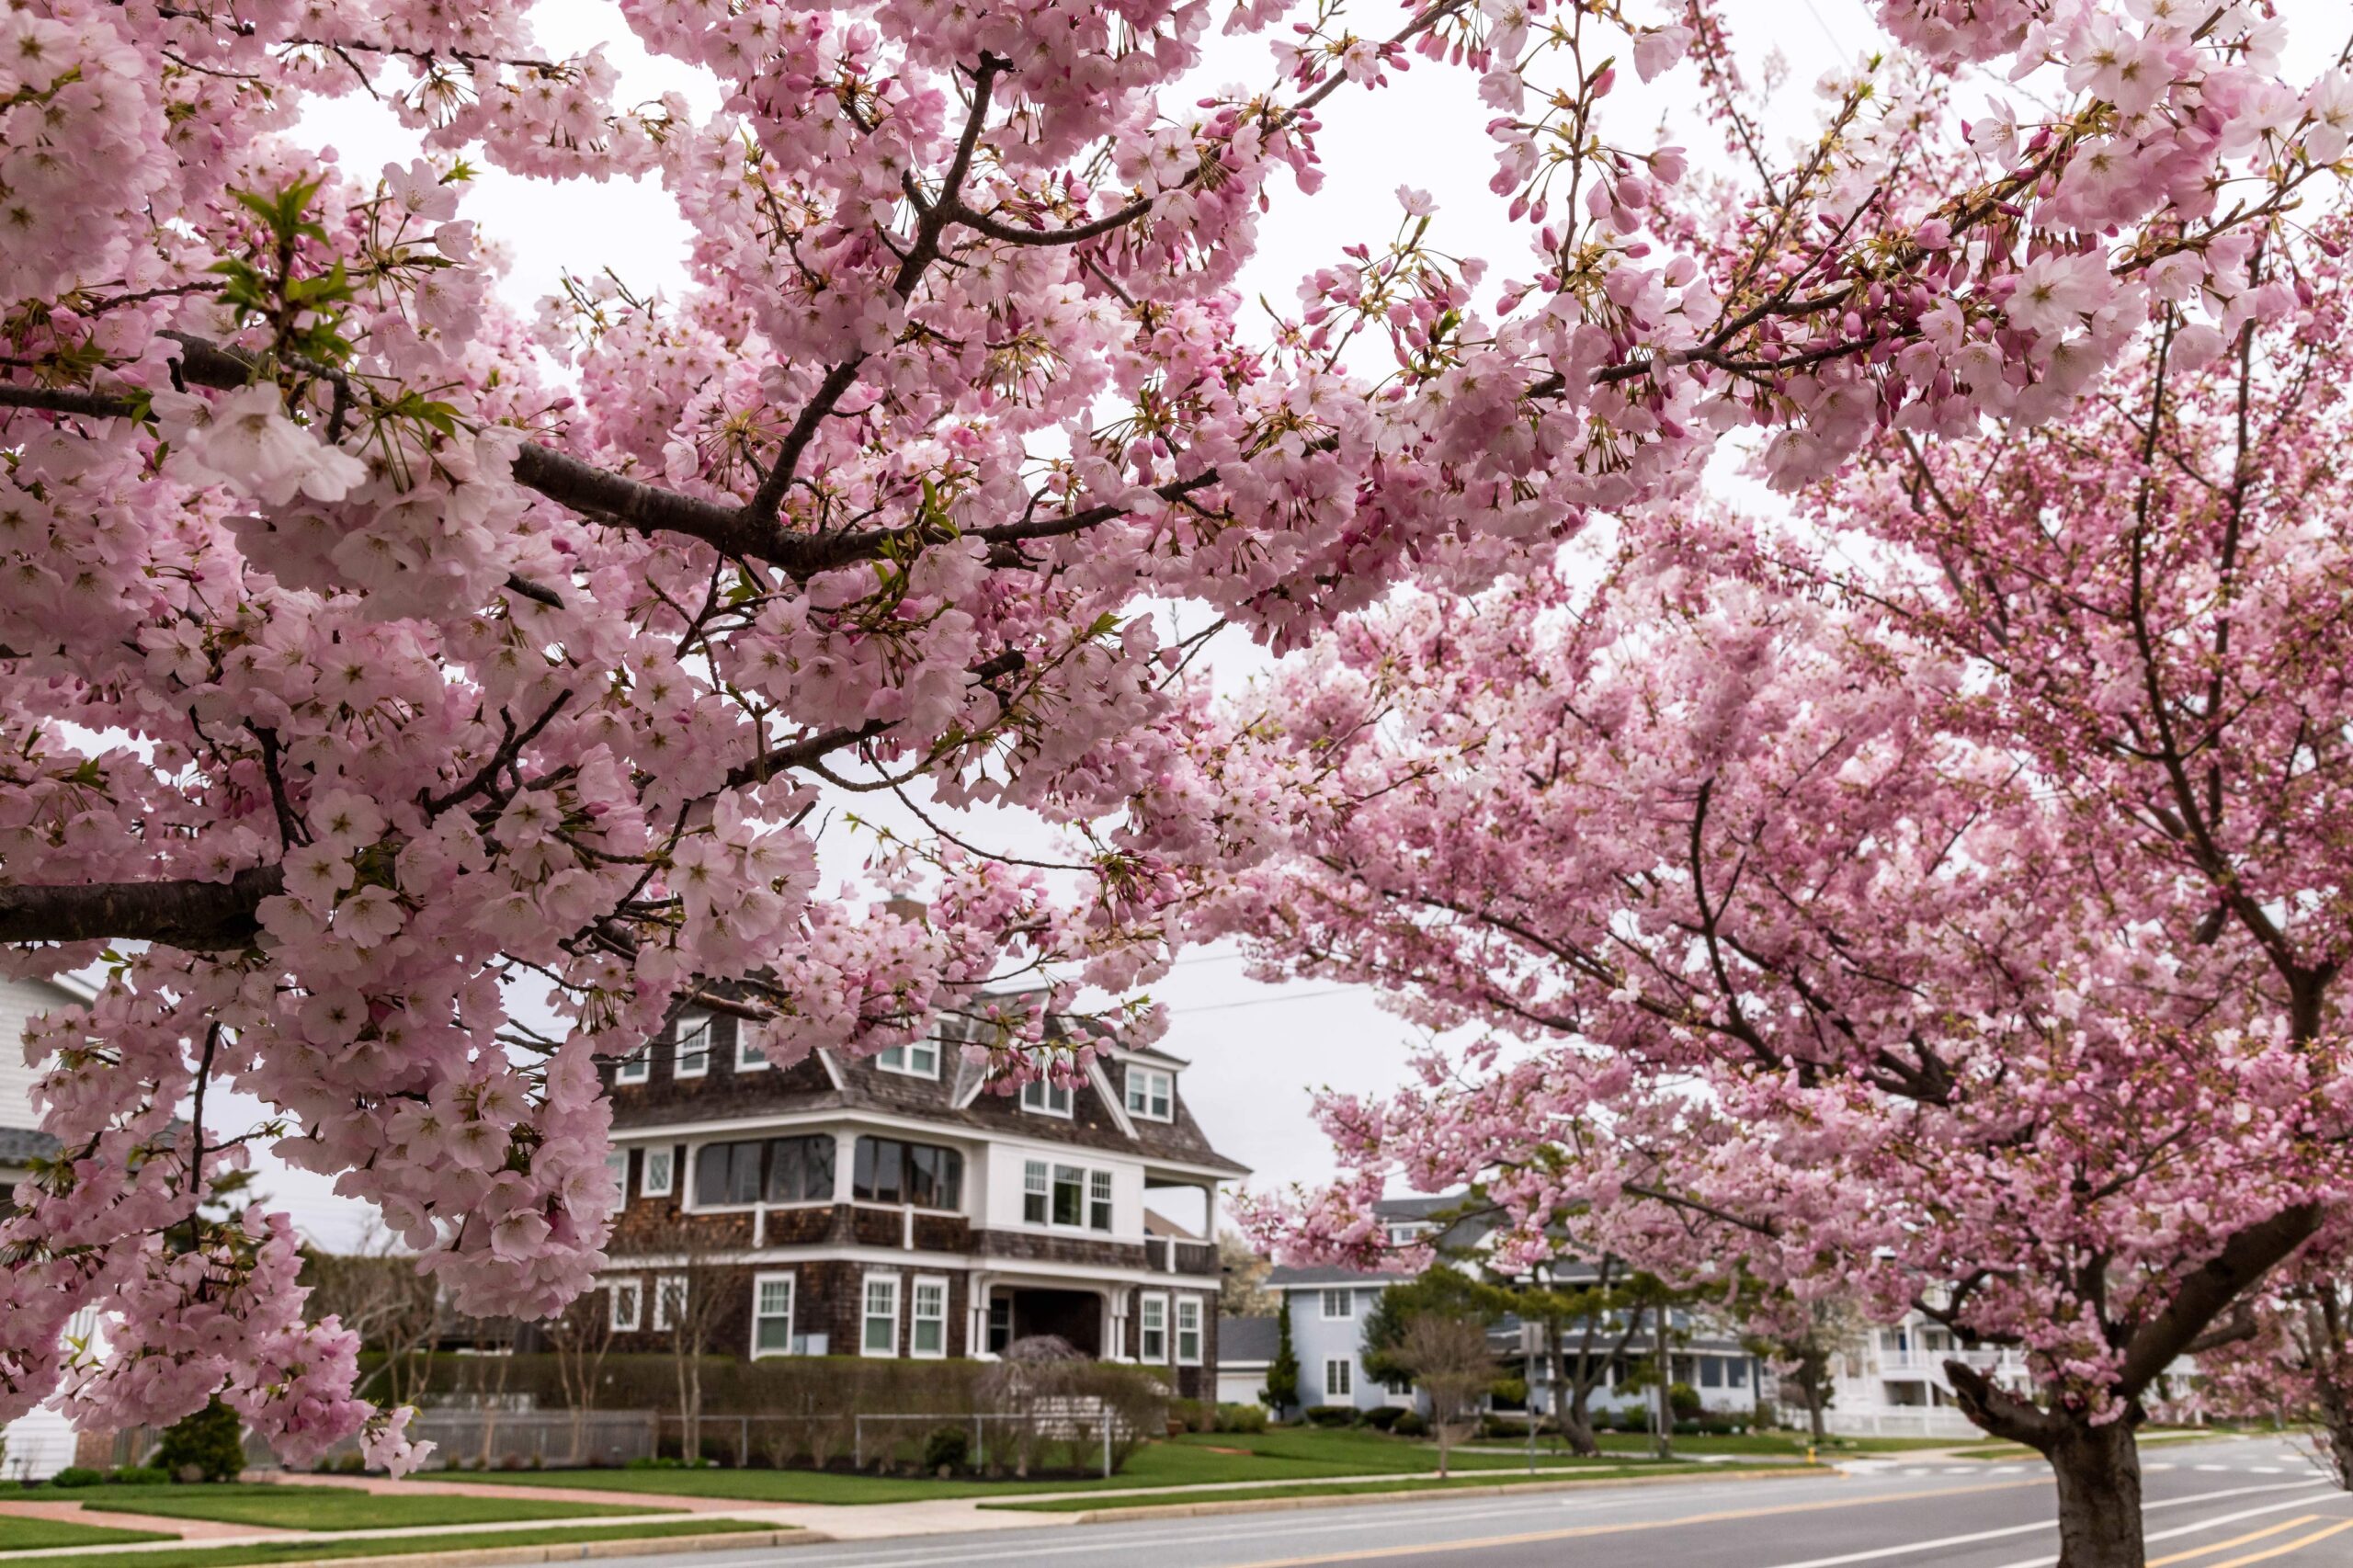 Two pink cherry blossom trees framing a cedar shake shingle home on a cloudy day